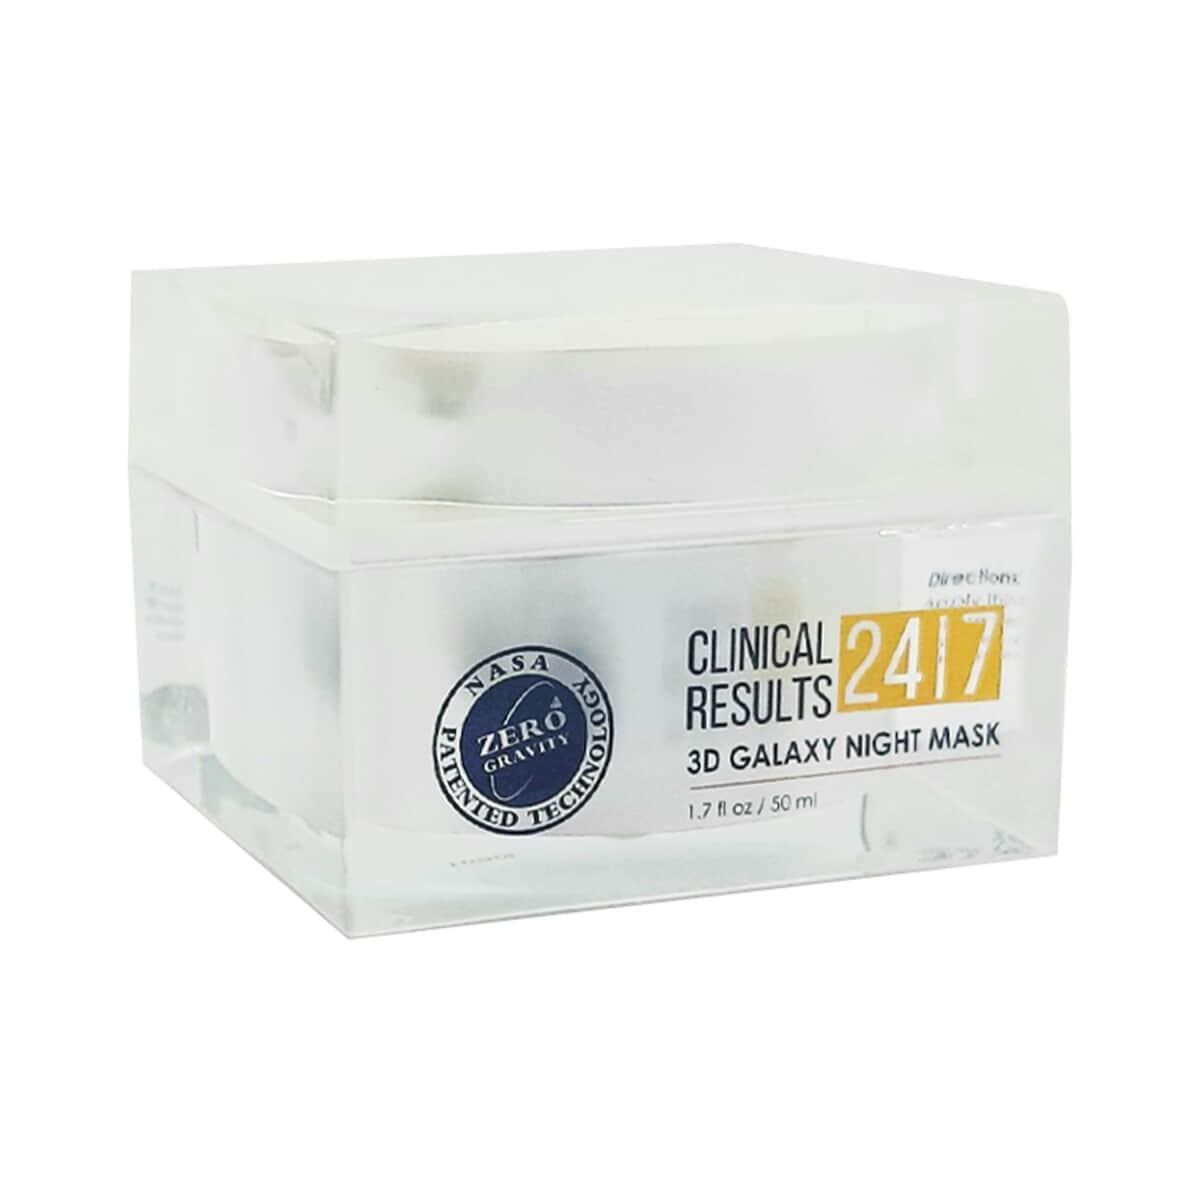 Clinical Results 3D Galaxy Night Mask For Face And Neck, Paraben Free Mask For All Skin Types Hydration And Repair 1.7oz image number 0